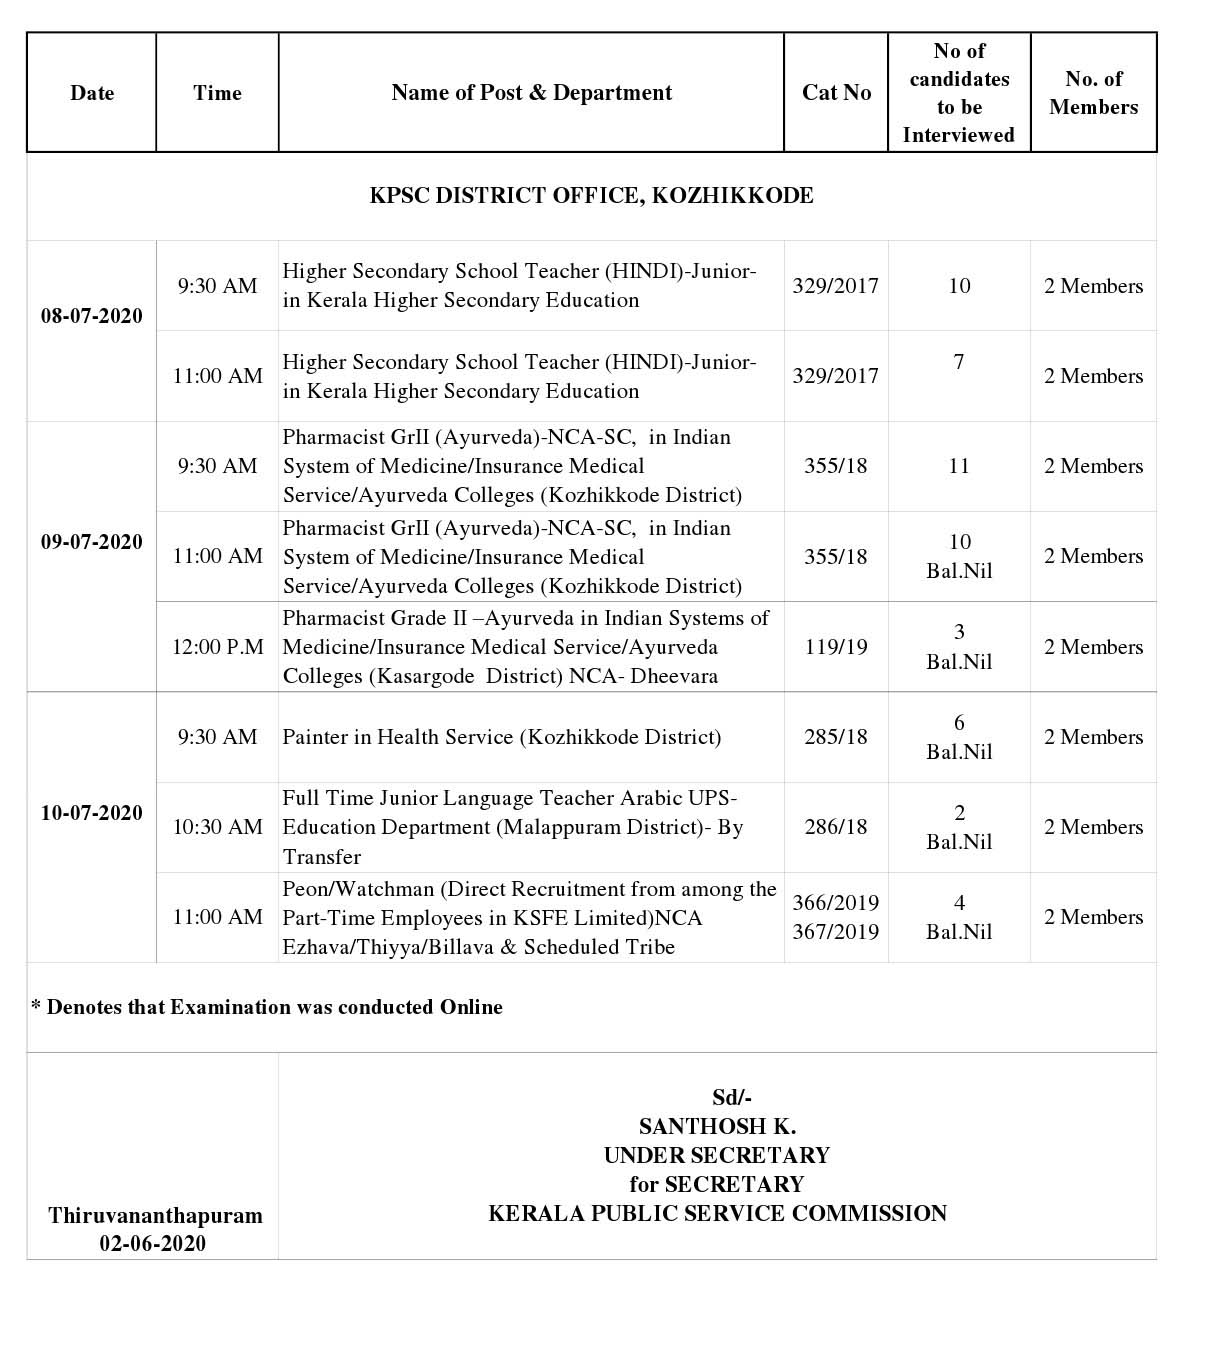 Kerala PSC Interview Programme For The Month Of July 2020 - Notification Image 4